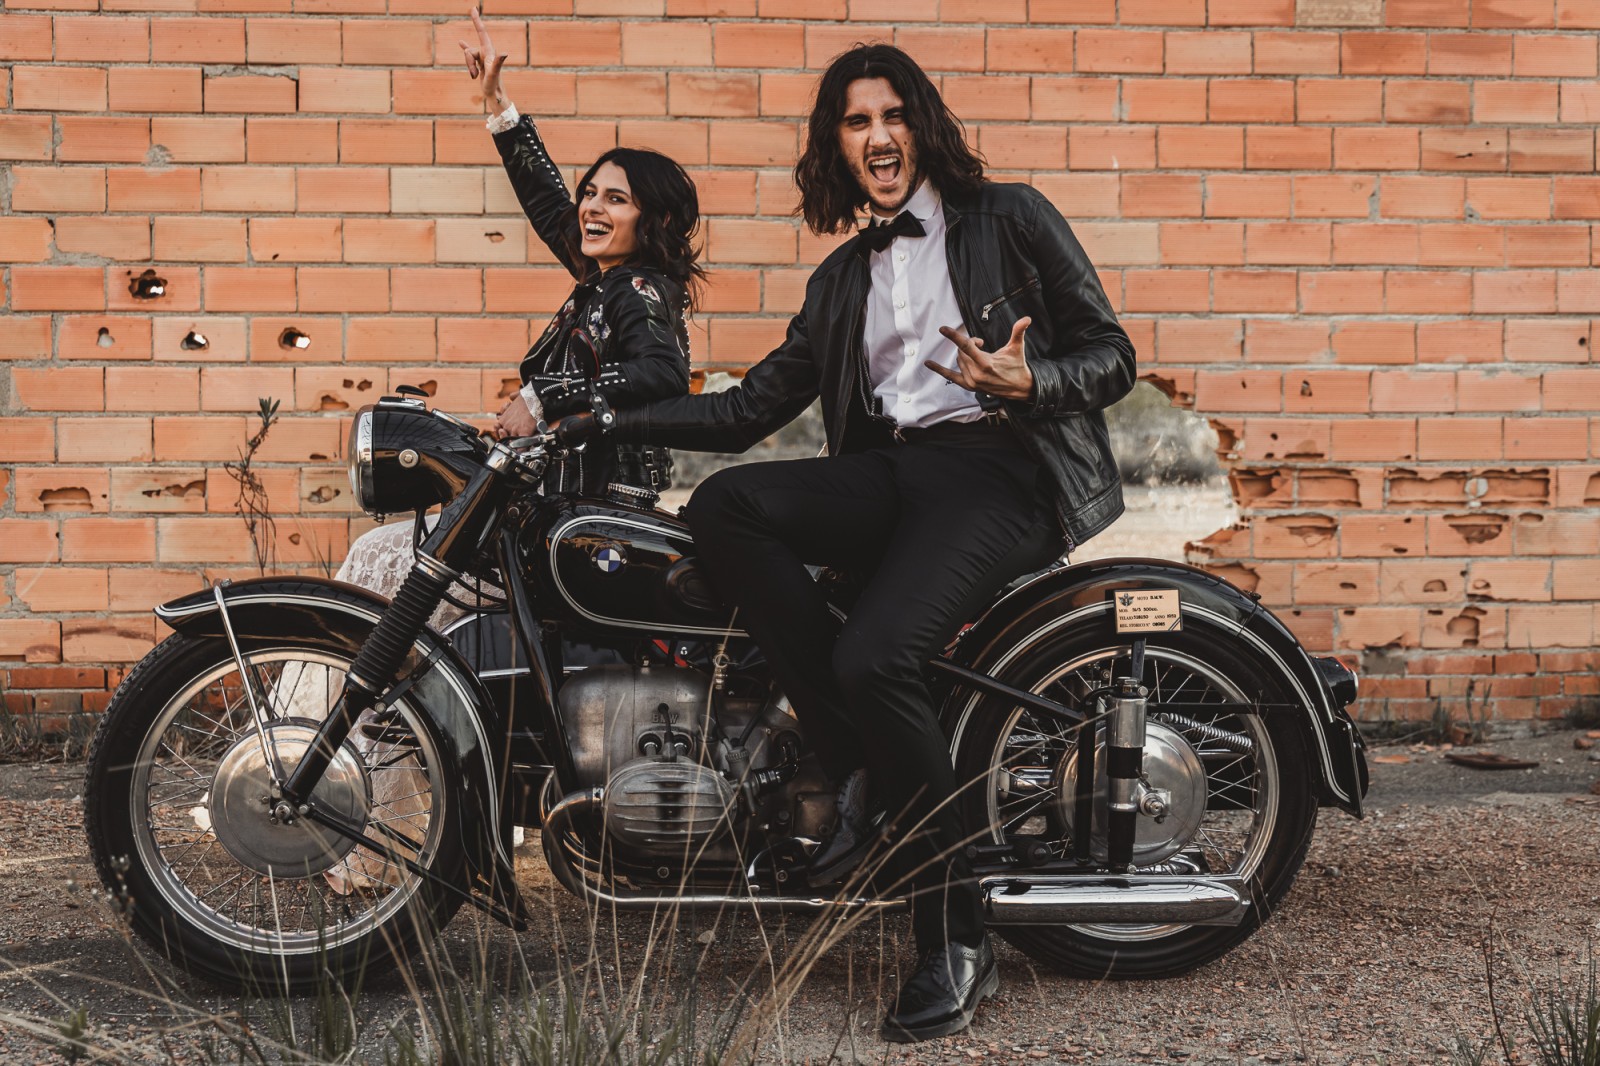 bride and groom on motorcycle wearing leather jackets